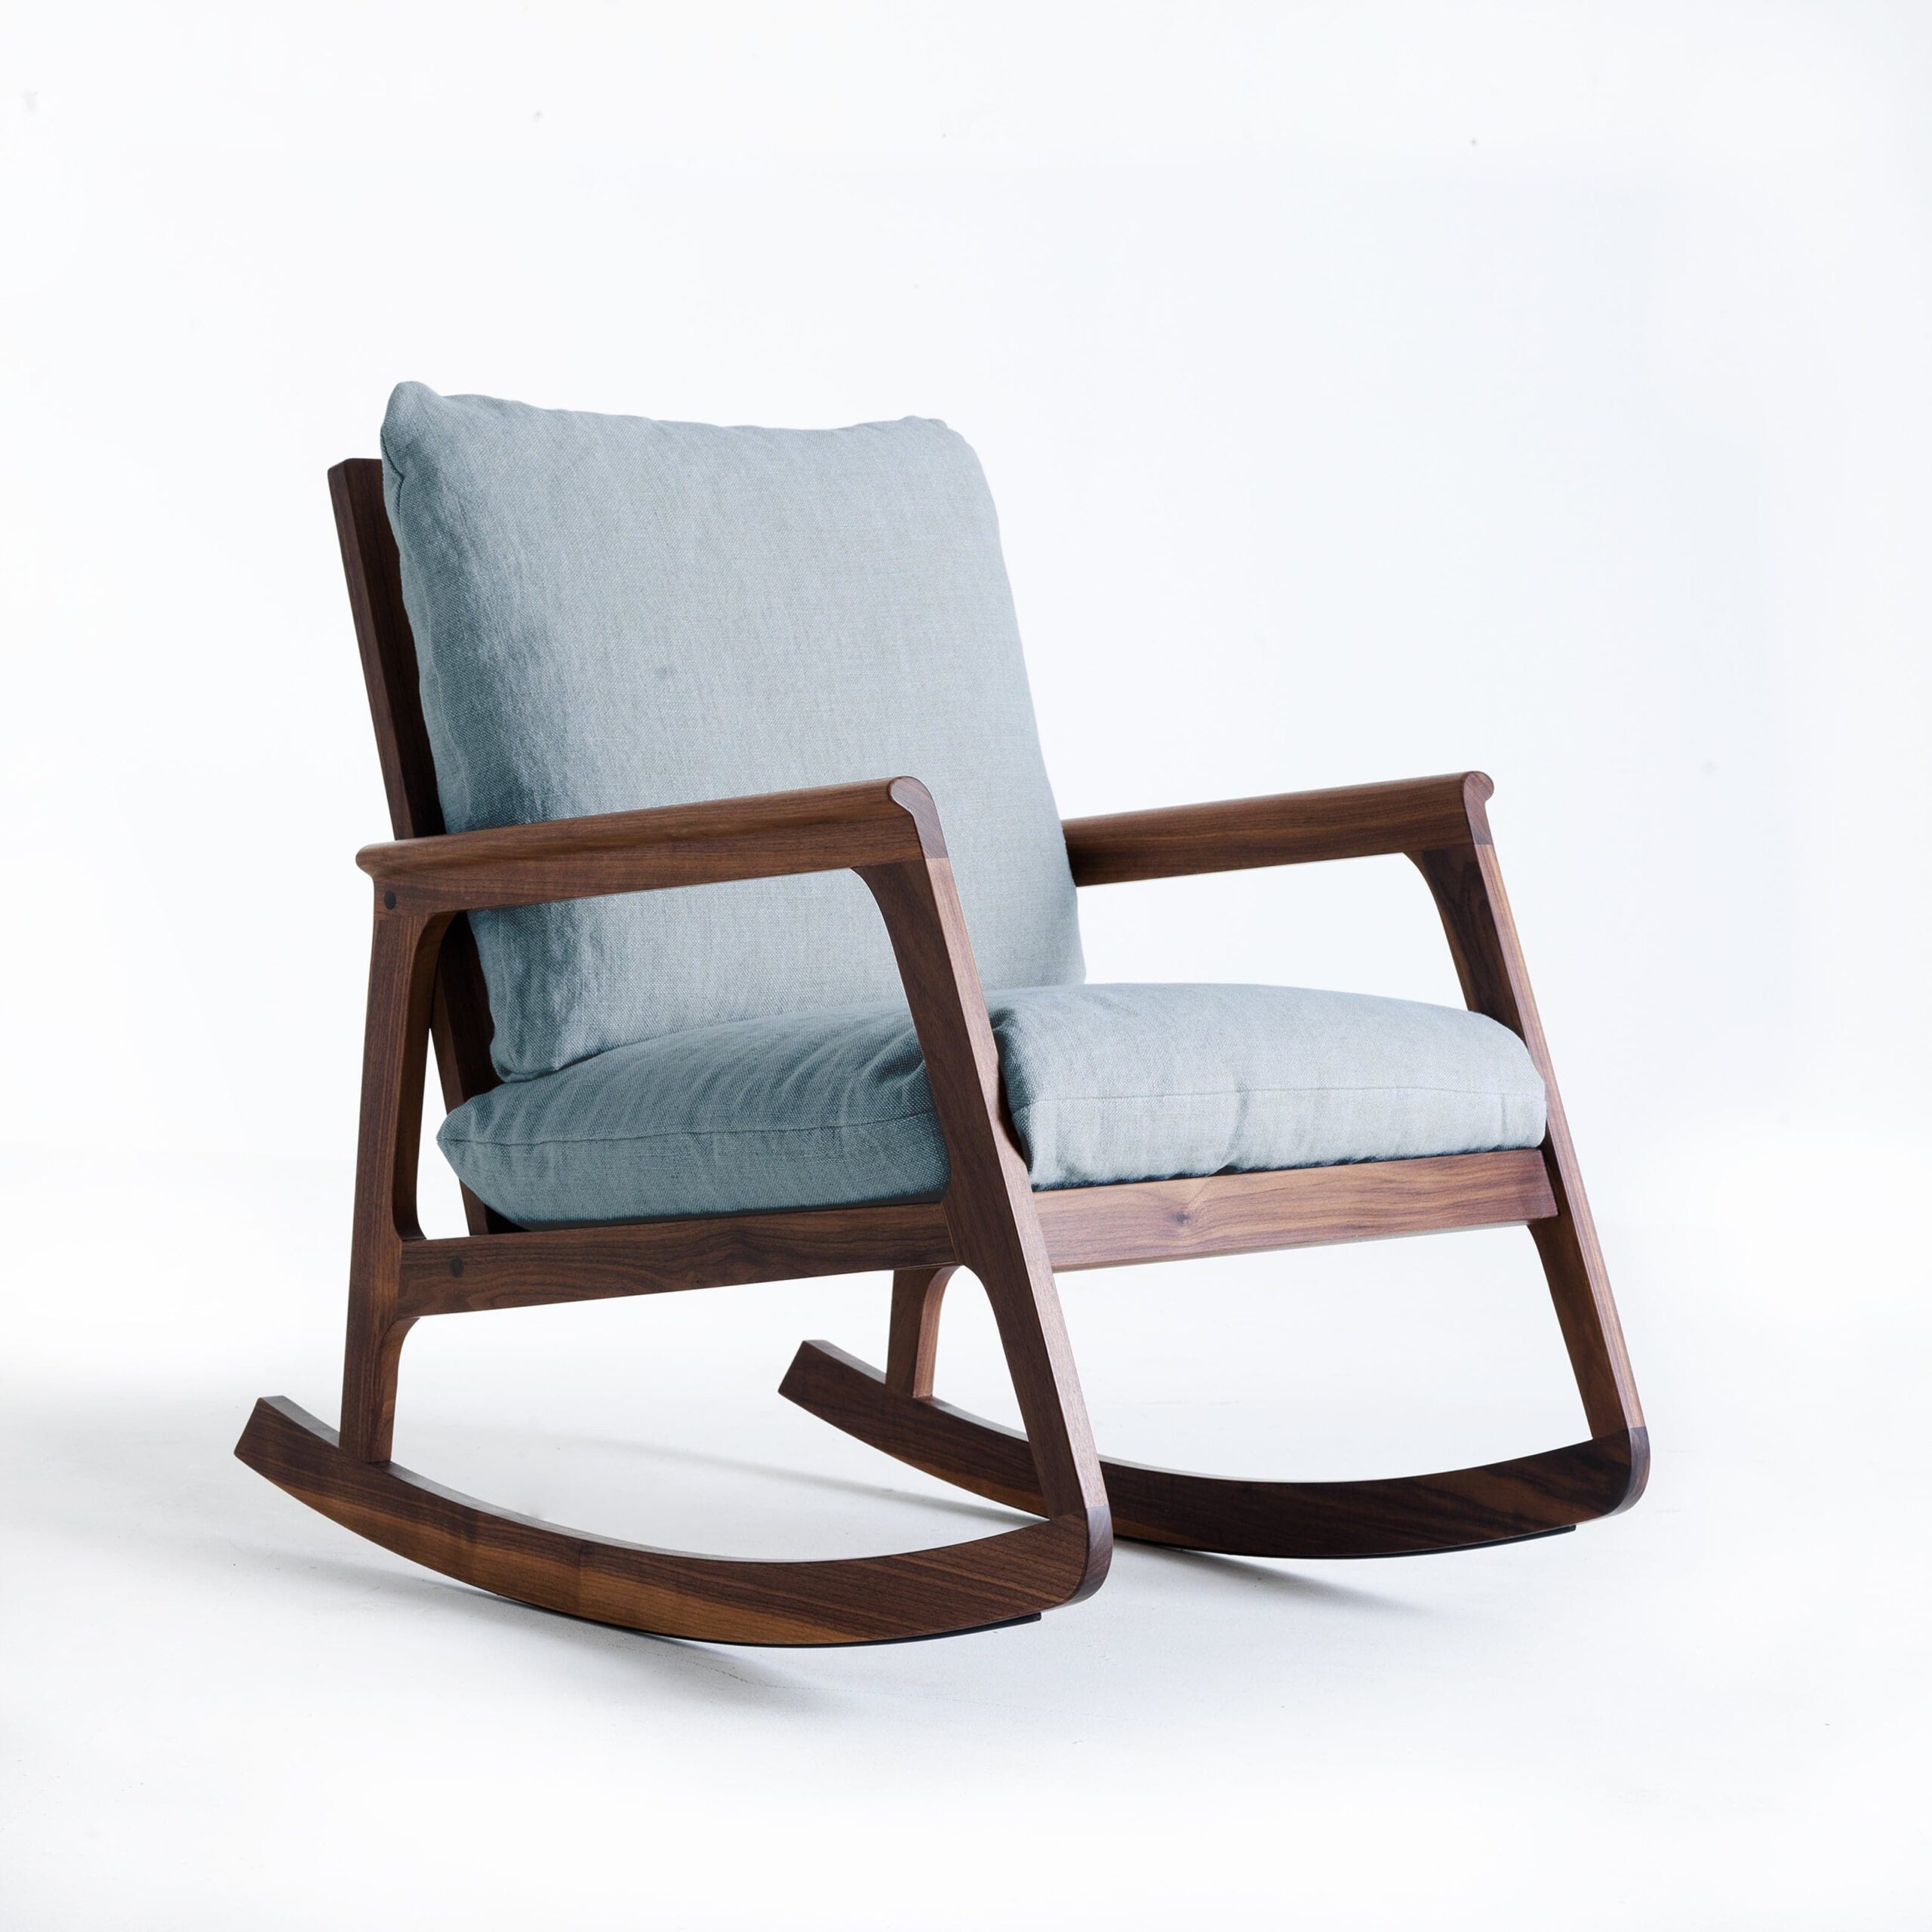 Rocking Chair for Easing off Stress